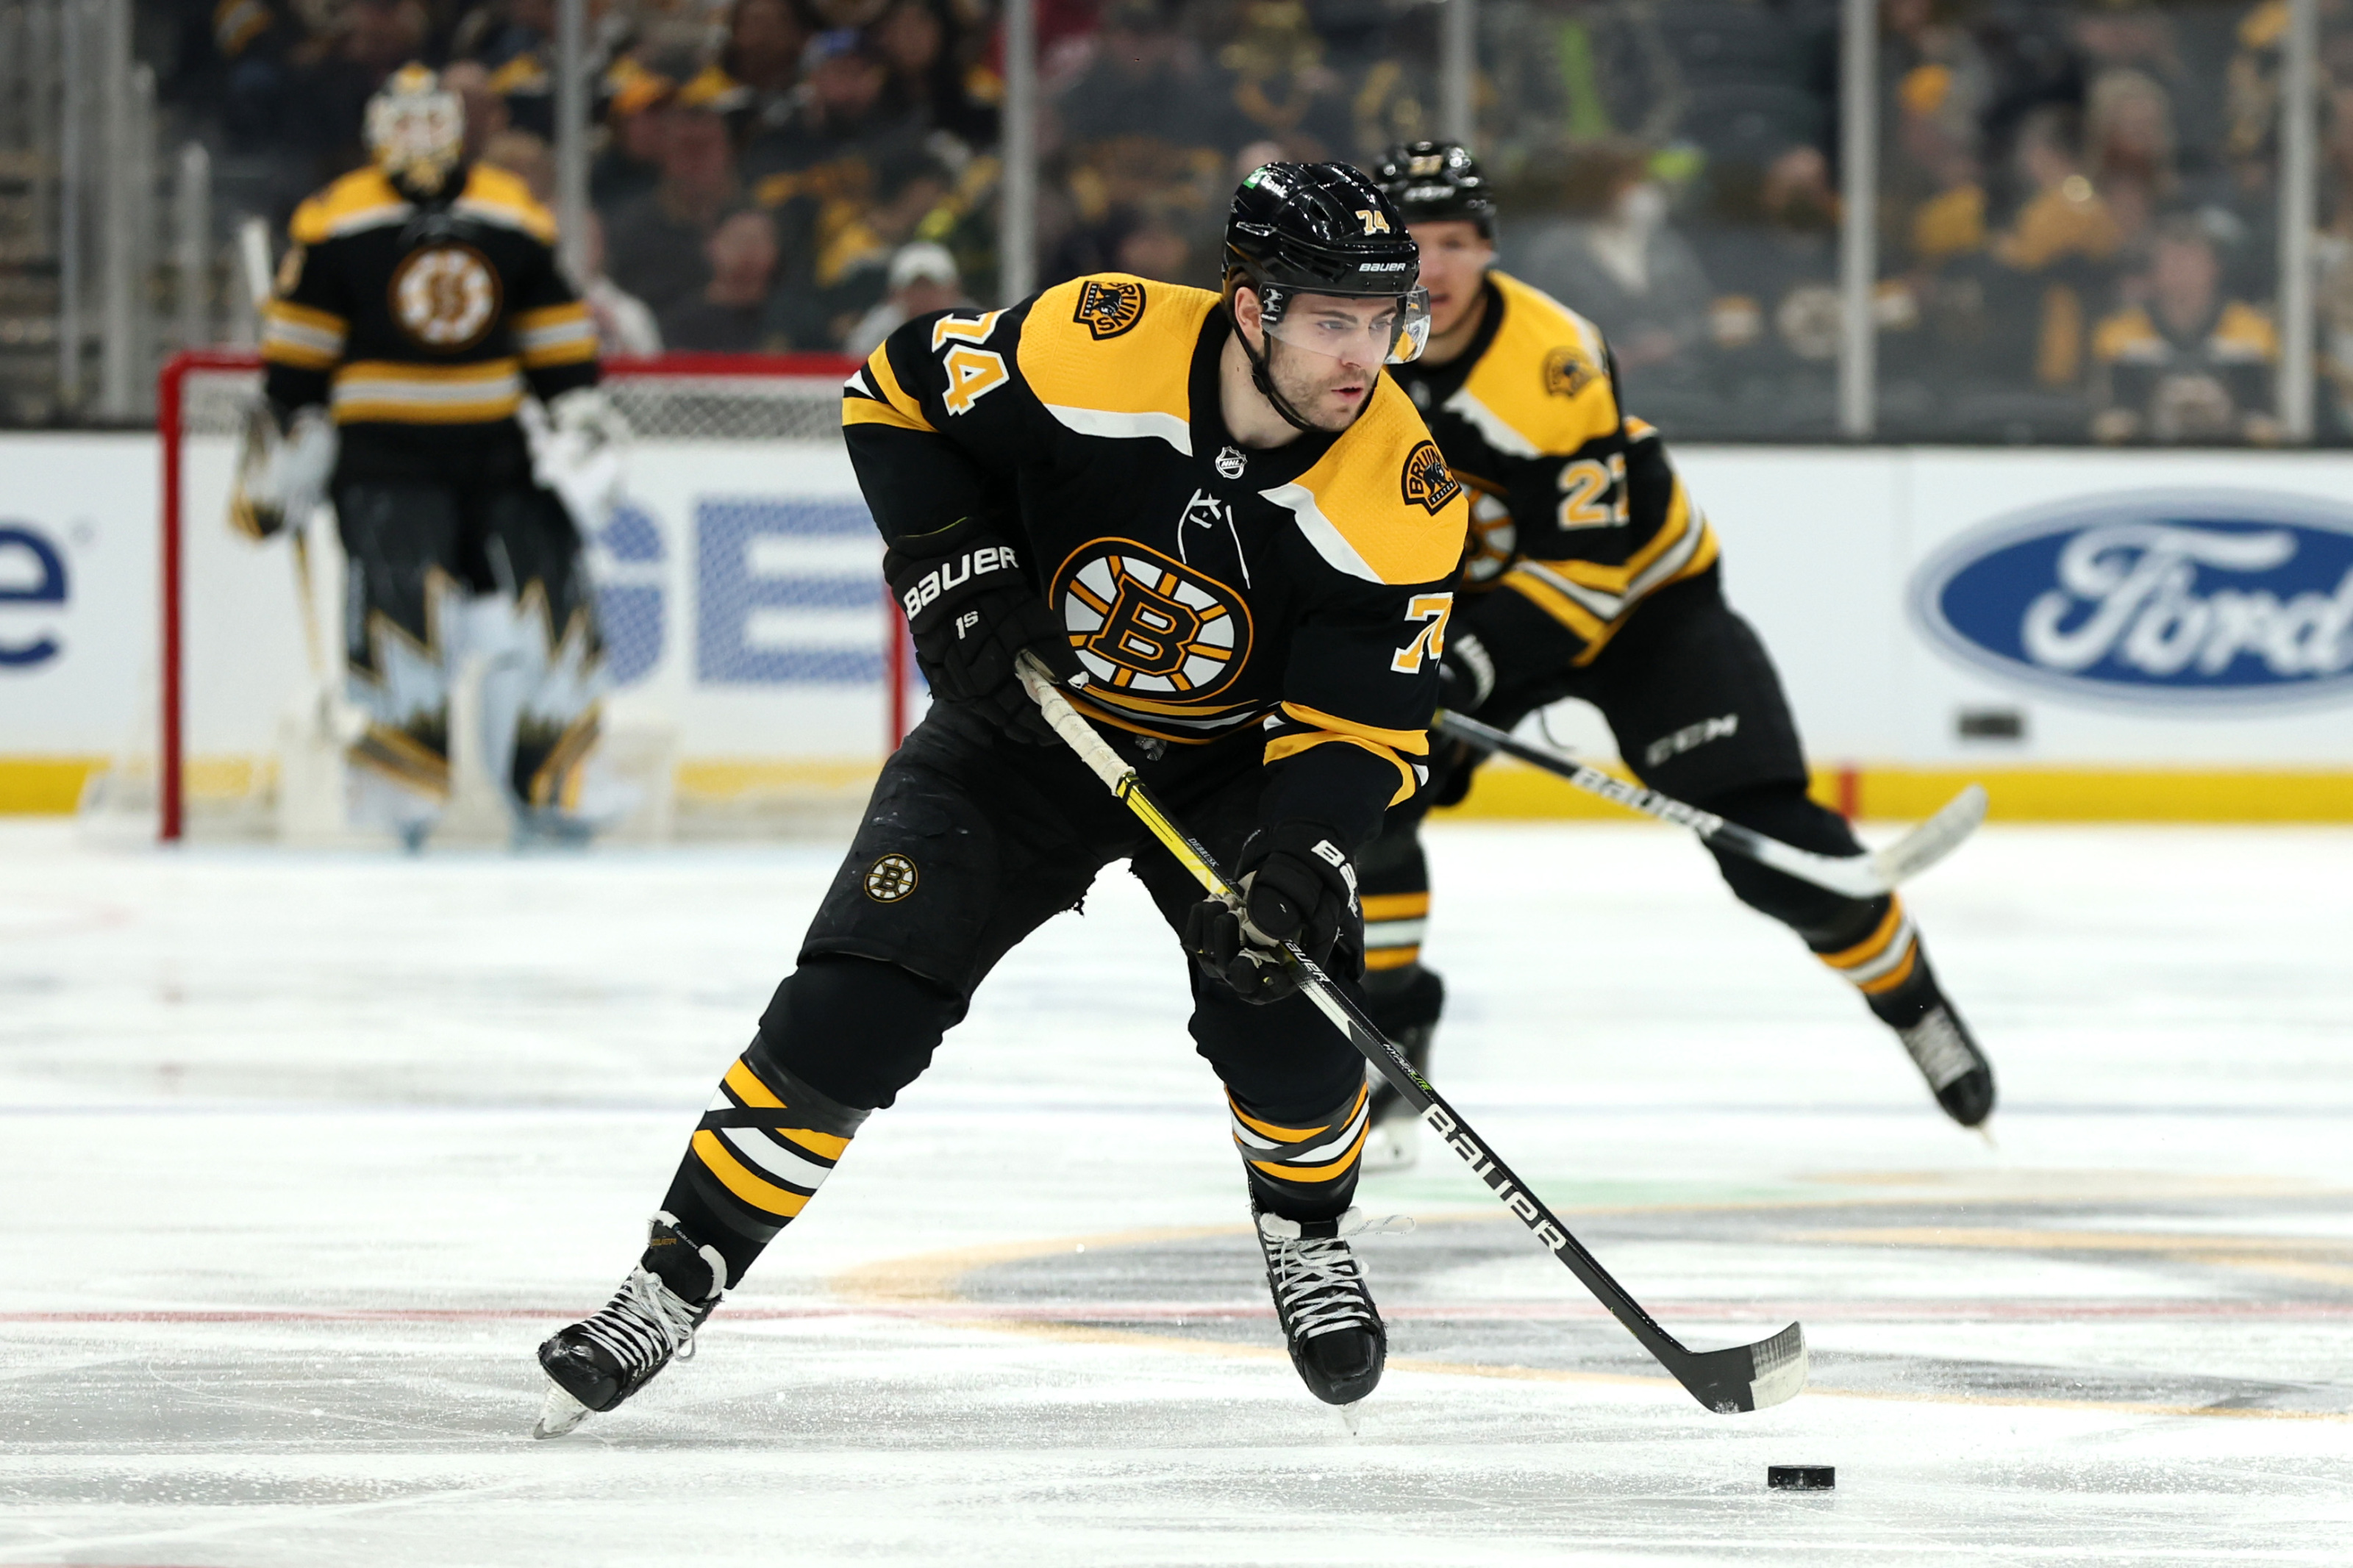 One-on-one with guest DeBrusk, Hall ready to return